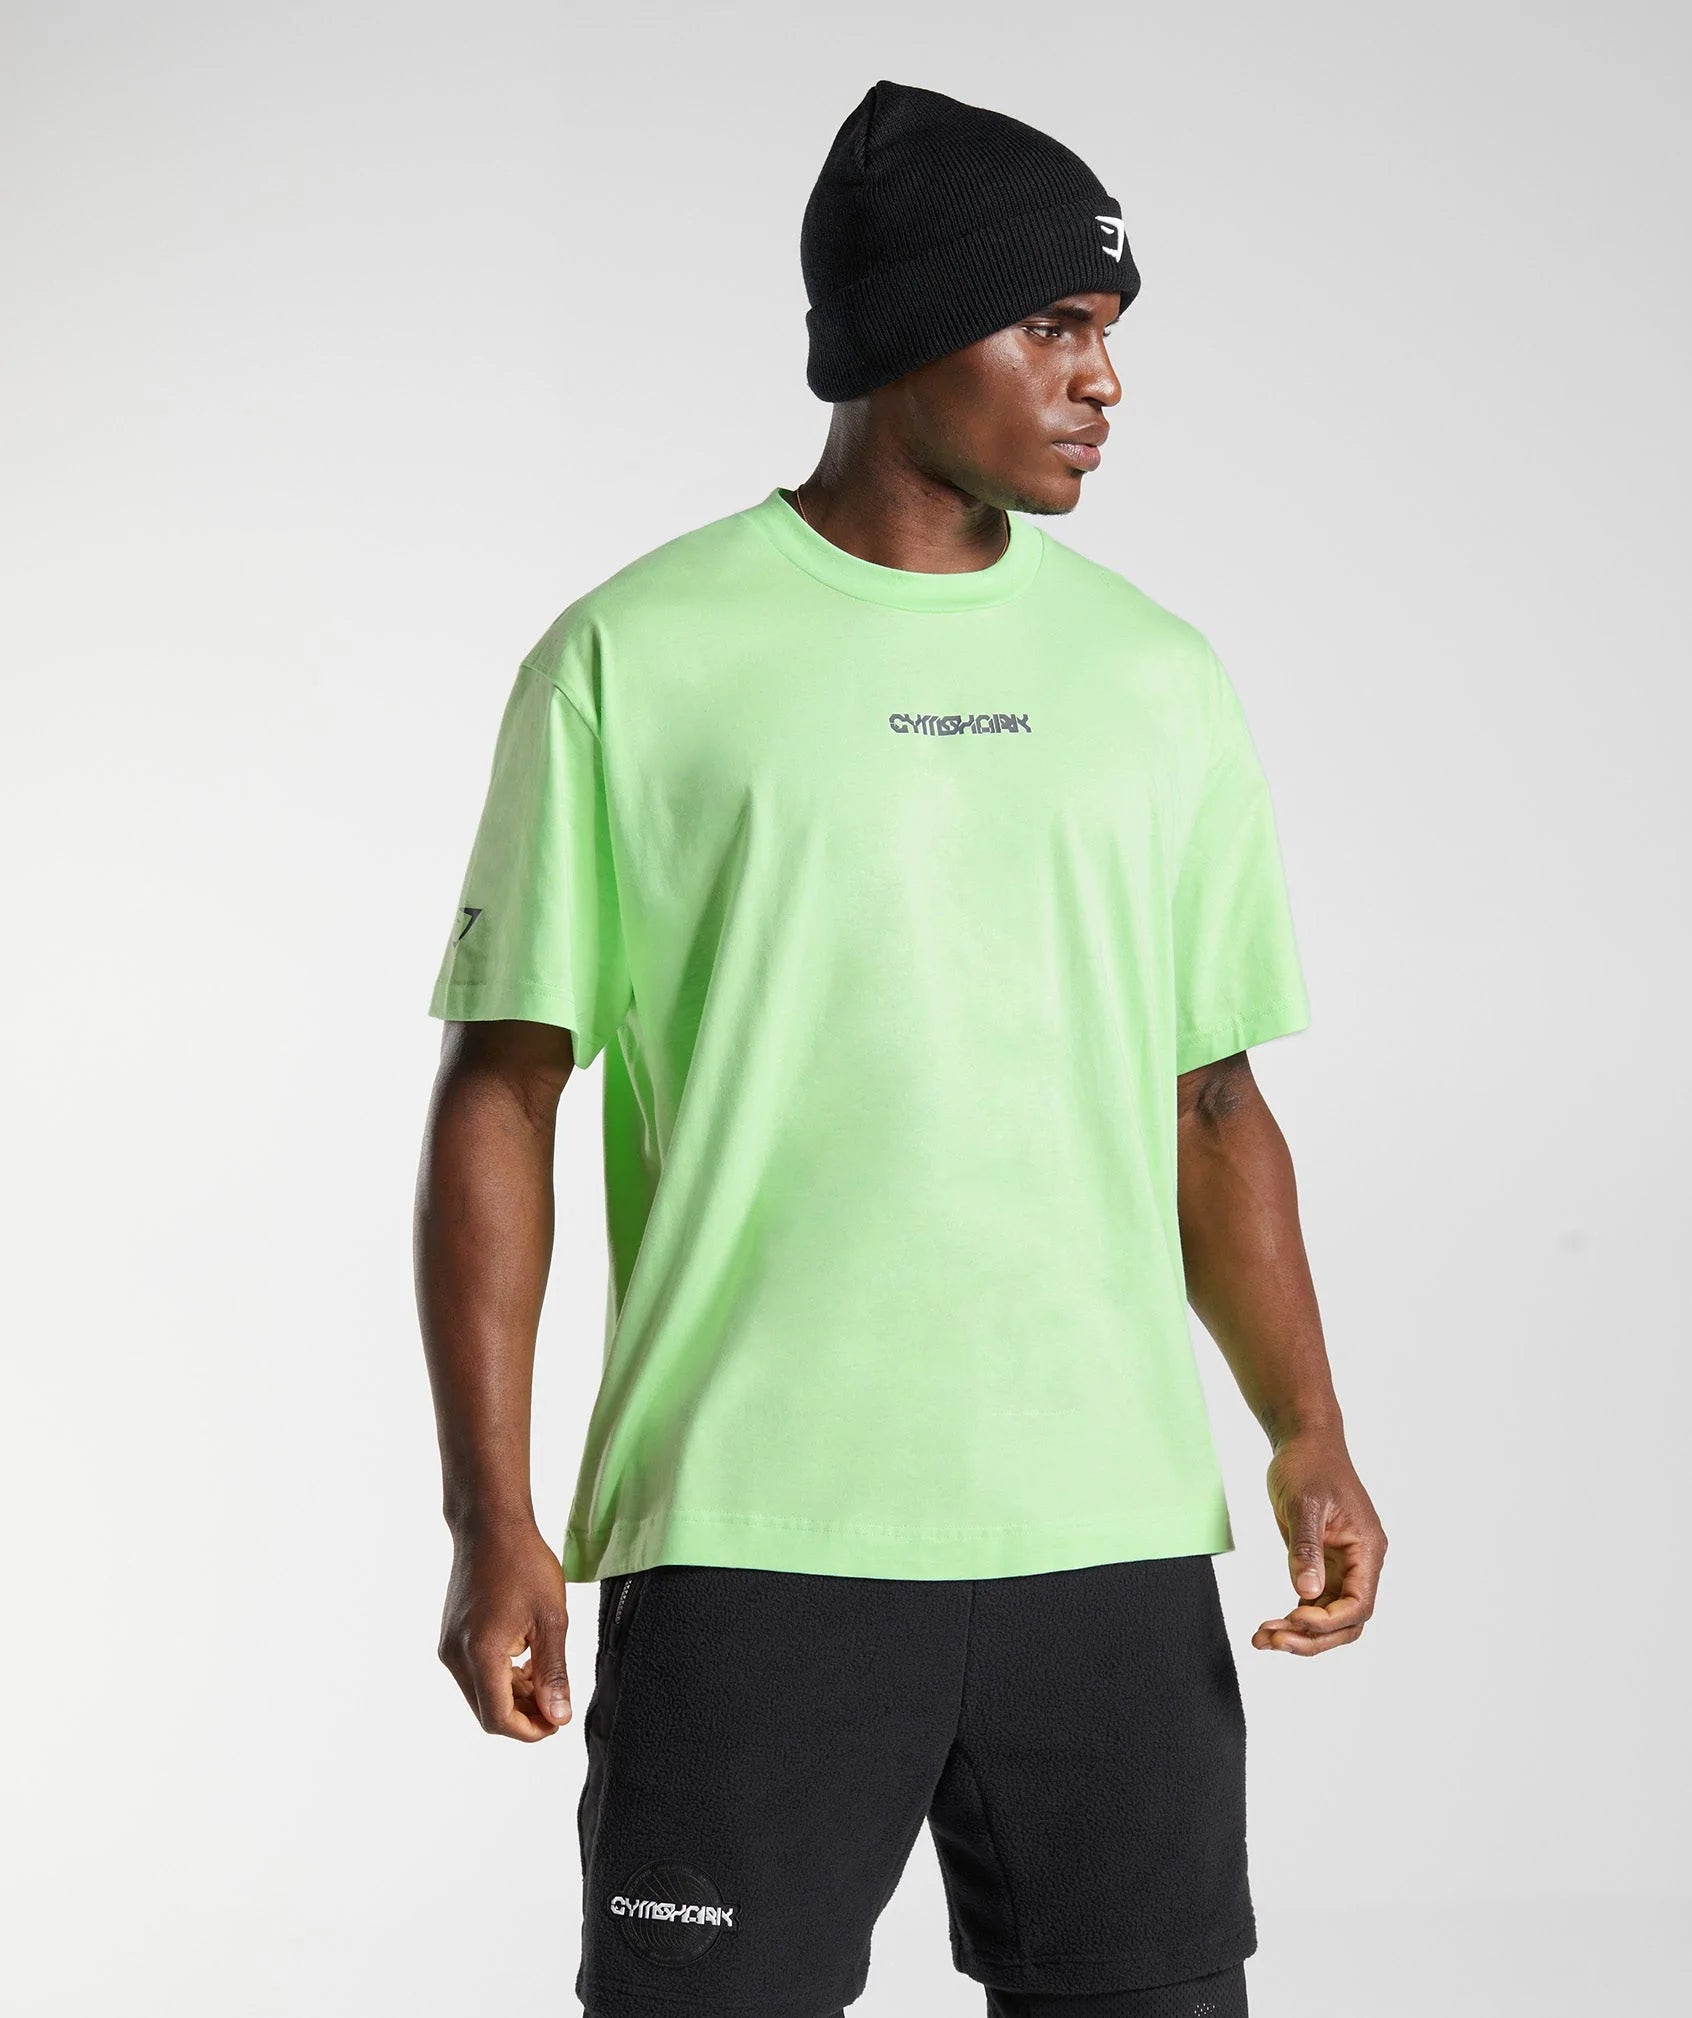 Vibes T-Shirt in Bright Mint - view 2